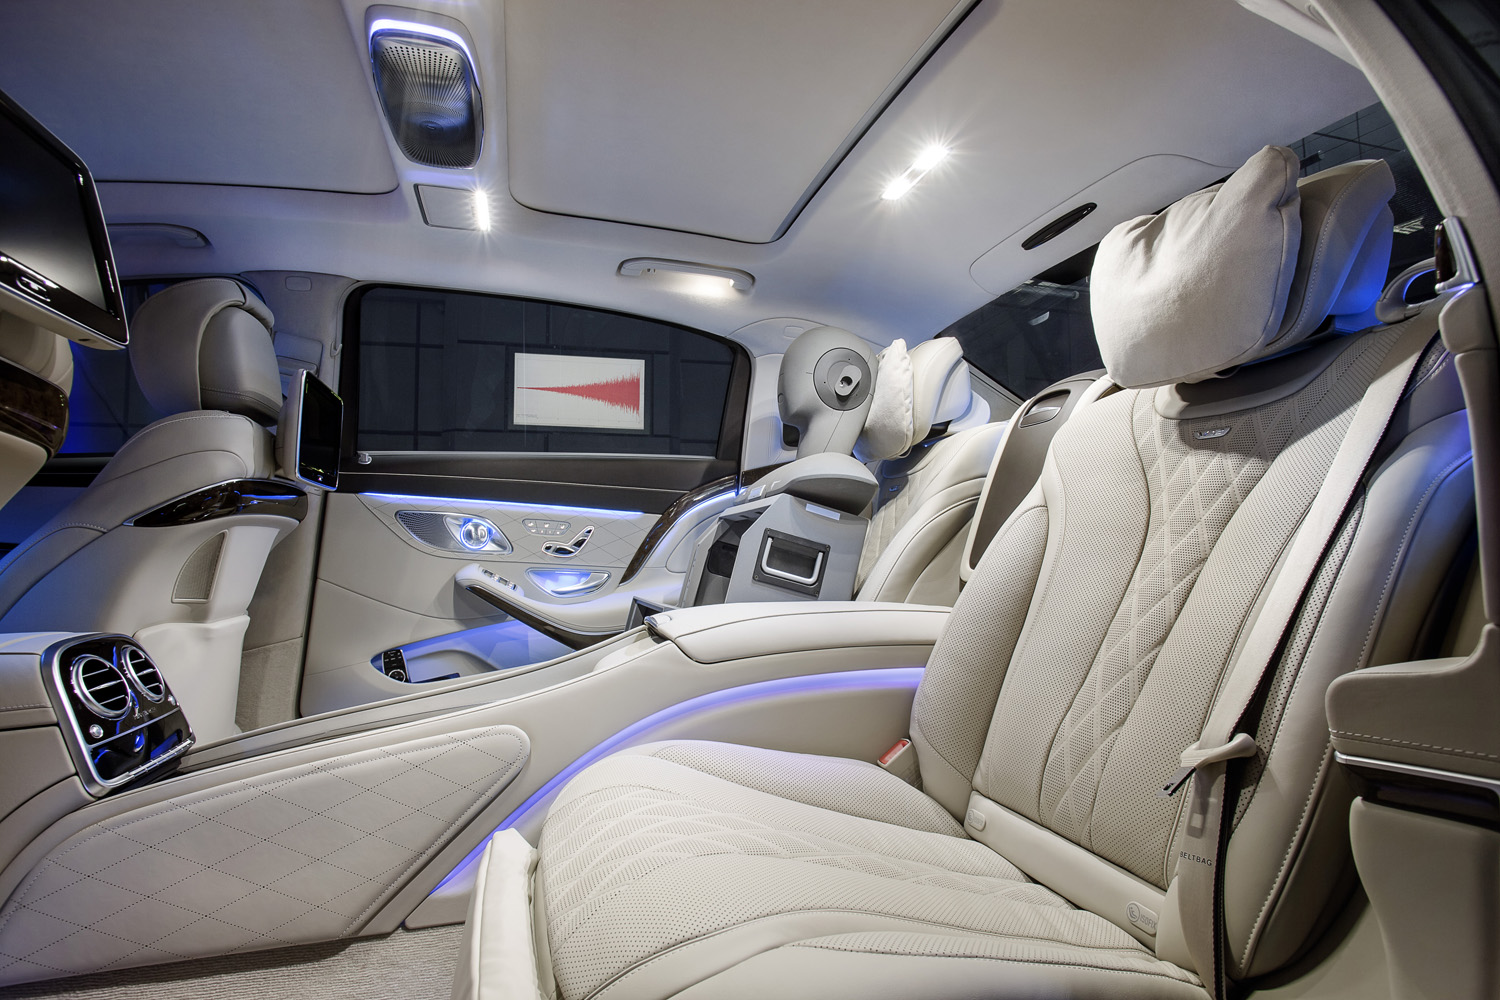 Mercedes-Maybach: onovertroffen luxe